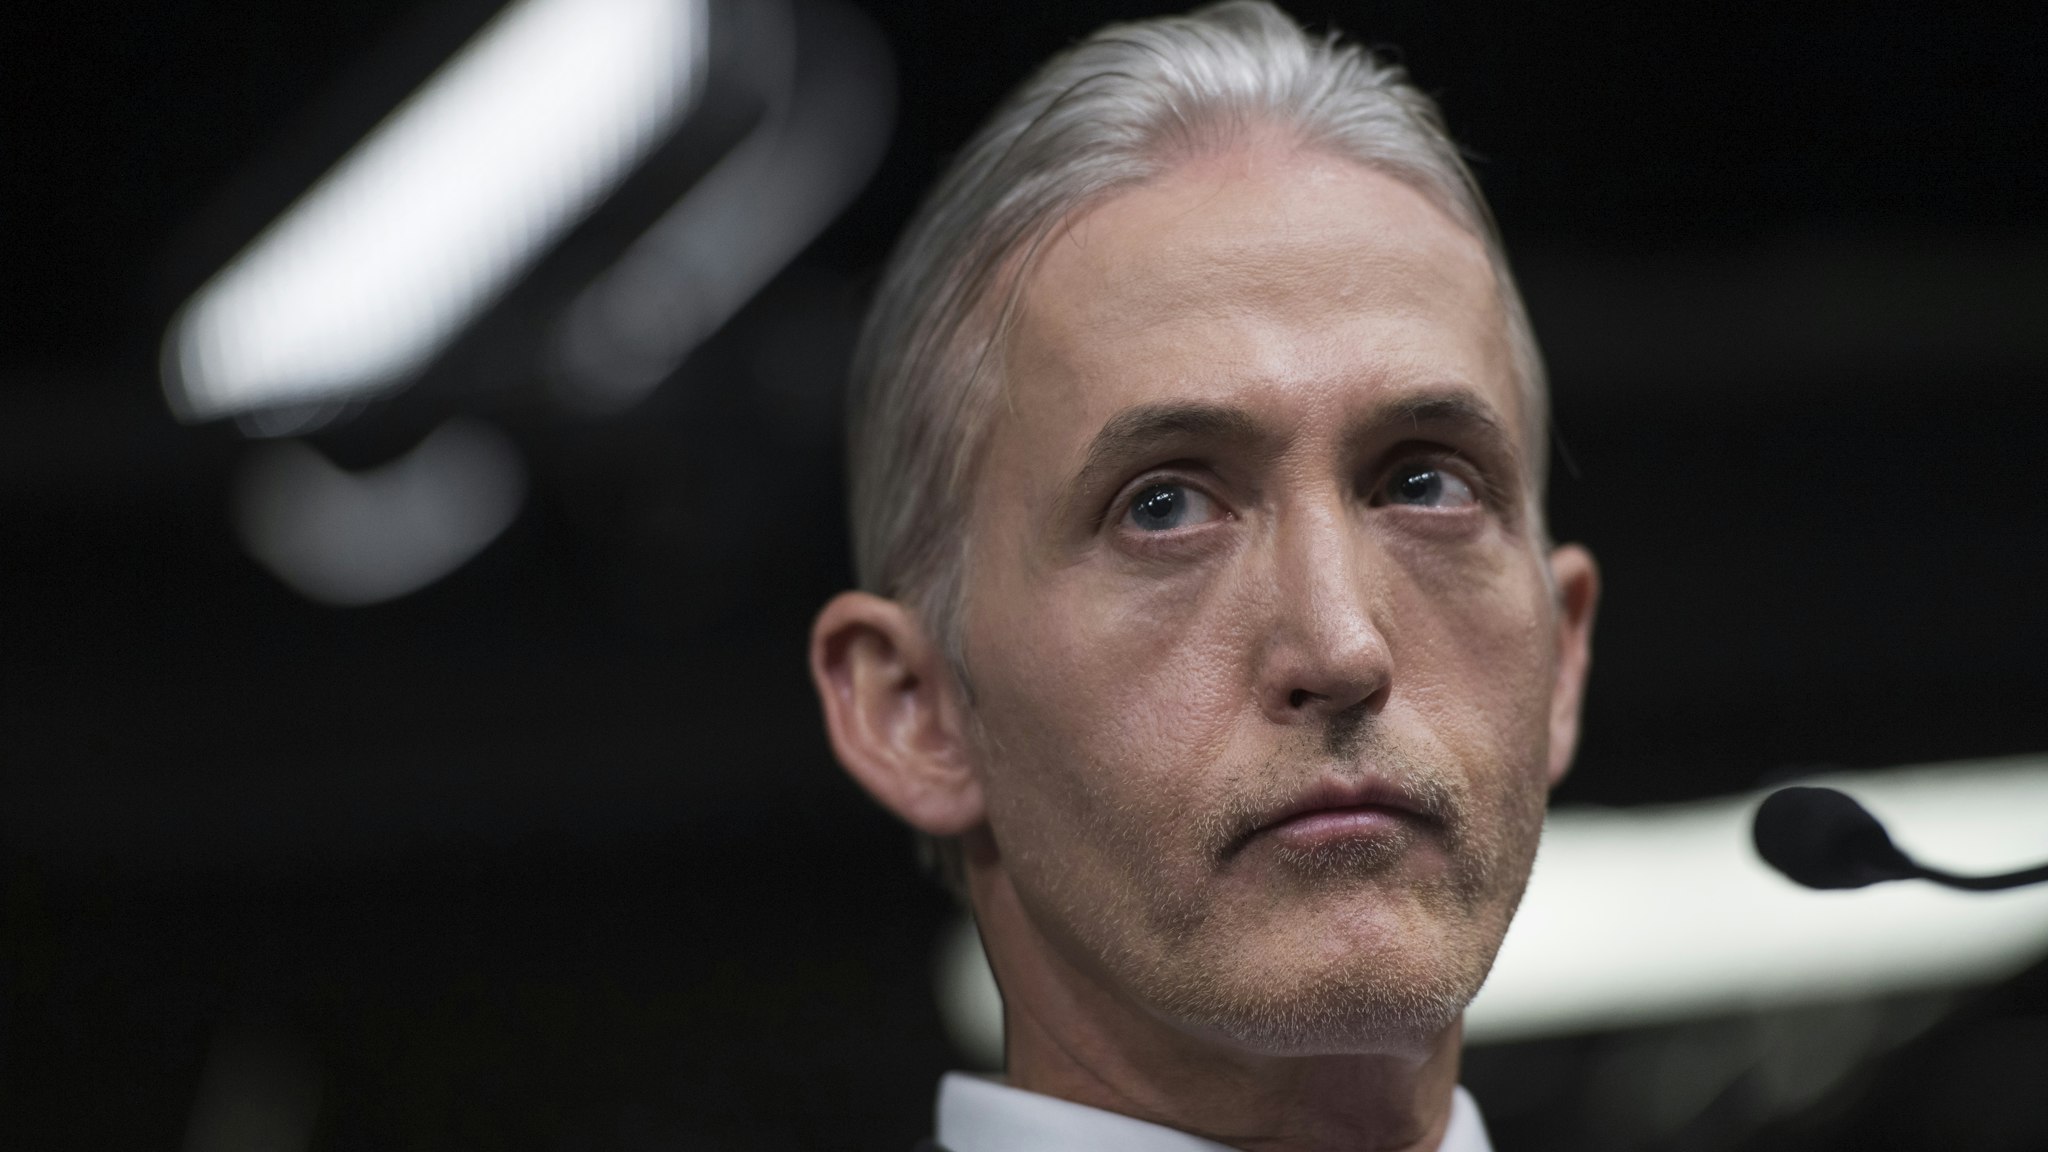 Rep. Trey Gowdy, R-S.C., chairman of the Select Committee on Benghazi, conducts a news conference in the Capitol Visitor Center, June 28, 2016, to announce the Committee's report on the 2012 attacks in Libya that killed four Americans.